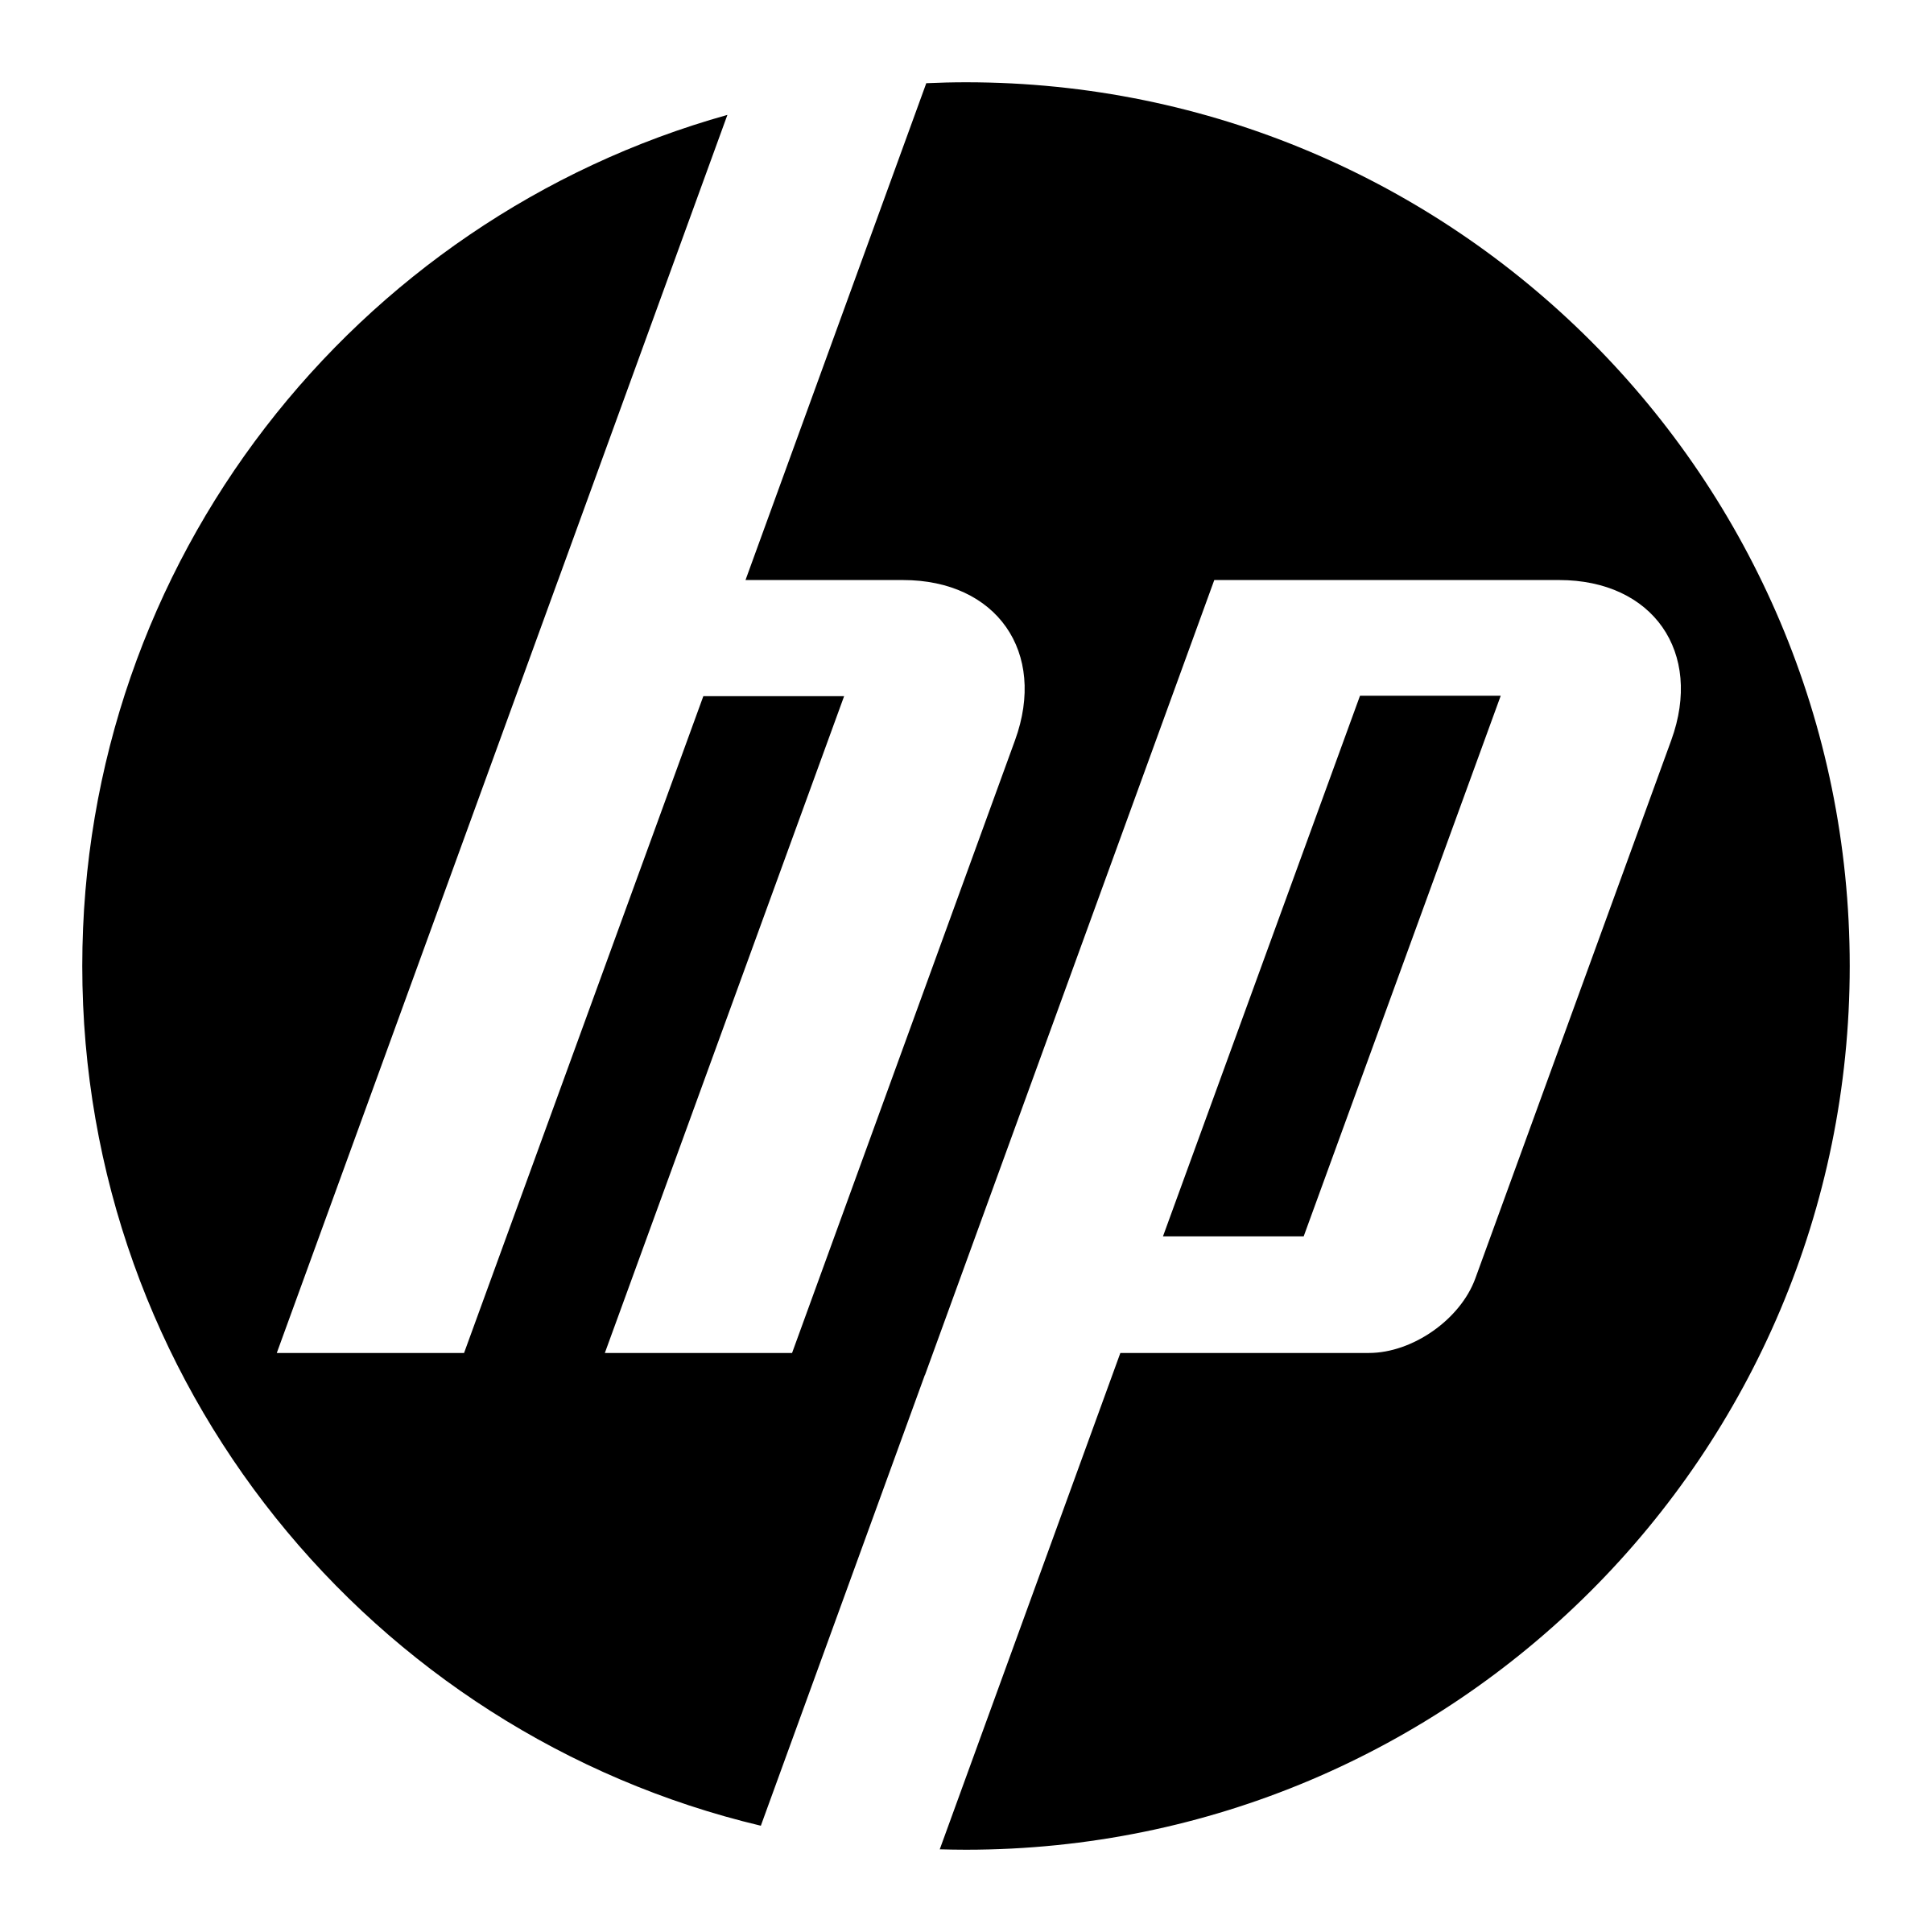 hewlett-packard-logo-black-and-white.png